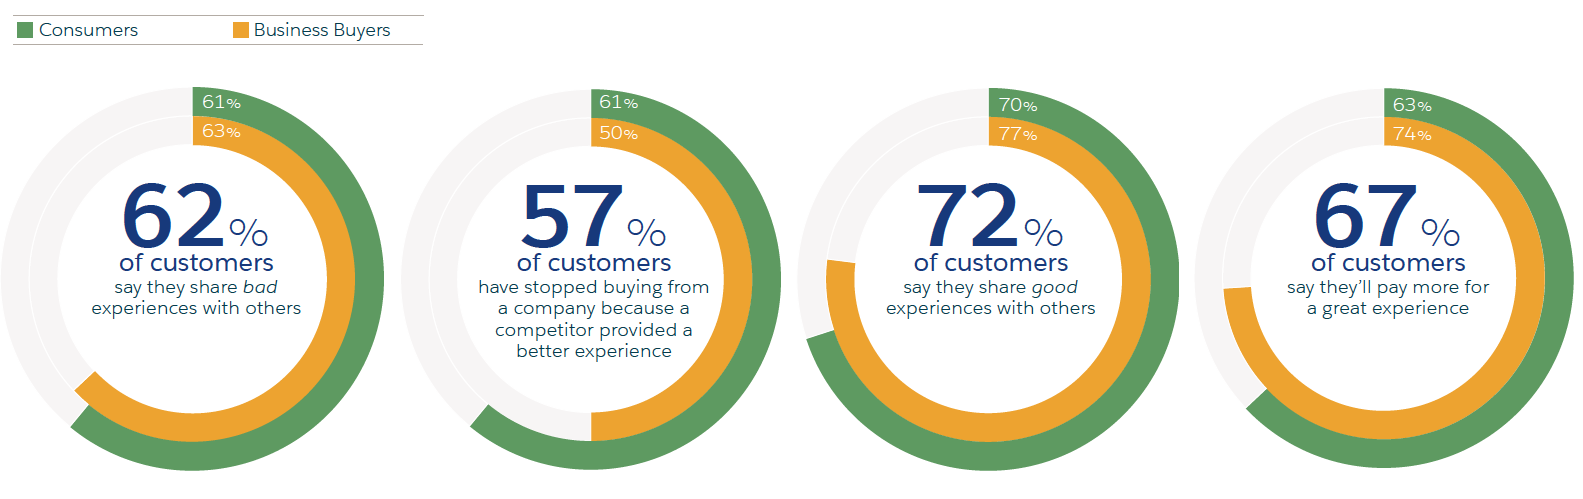 Experience is now a leading factor in consumer motivation, and many share that experience - whether good or bad.